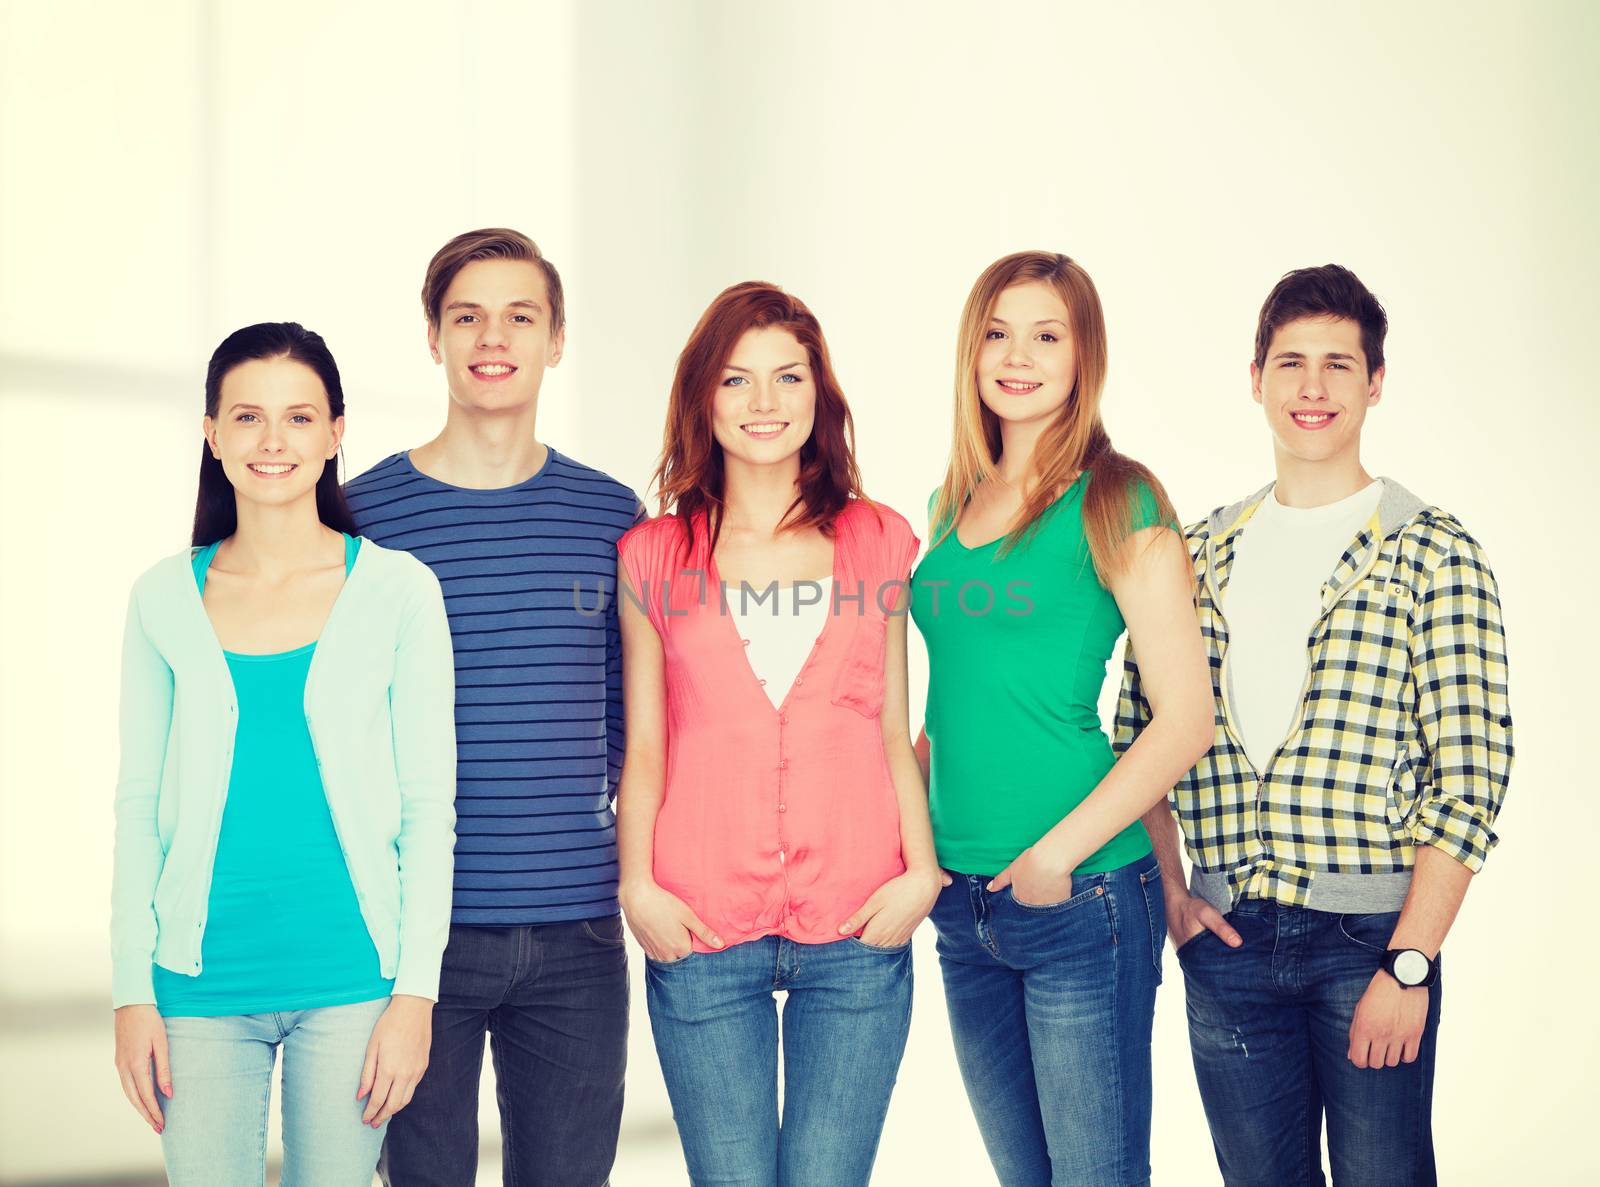 group of smiling students standing by dolgachov